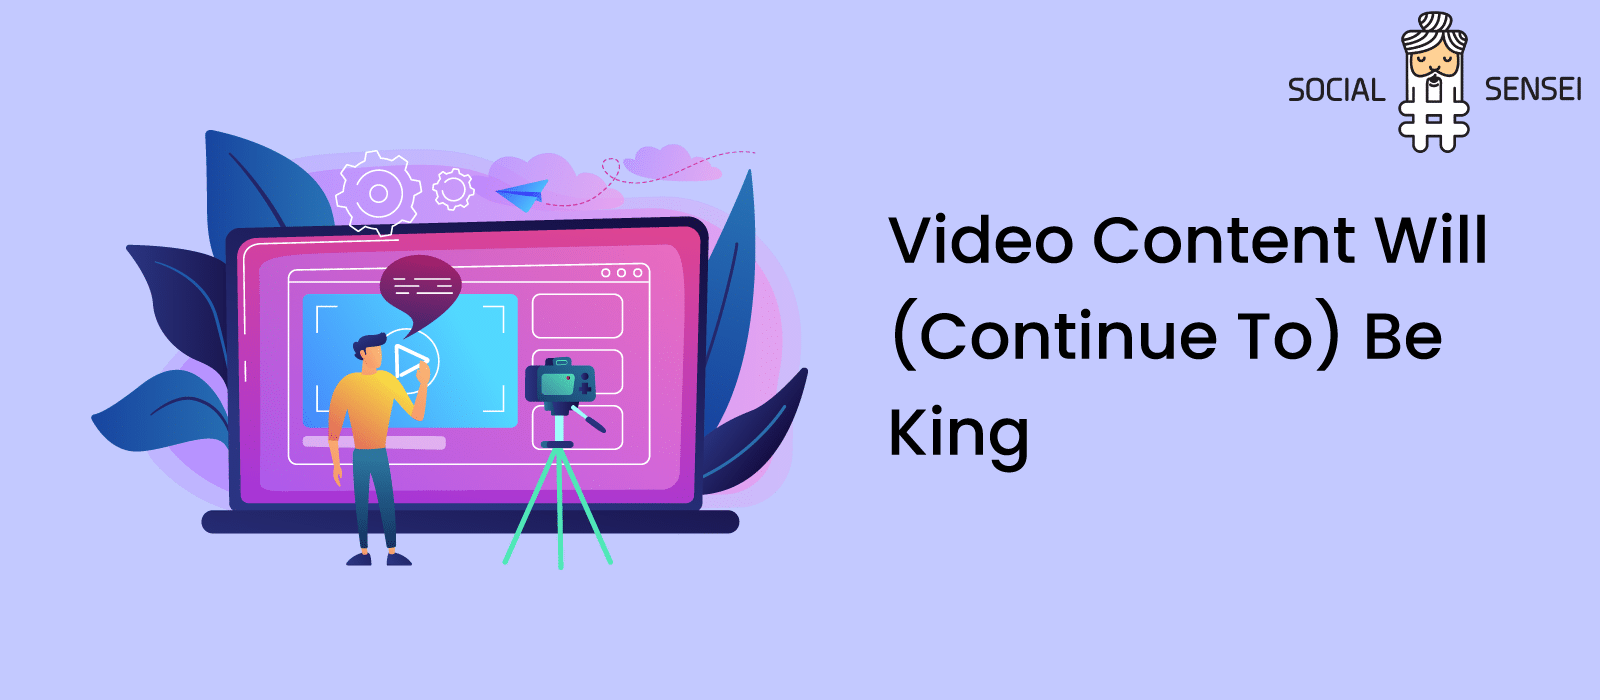 Video Content Will (Continue To) Be King